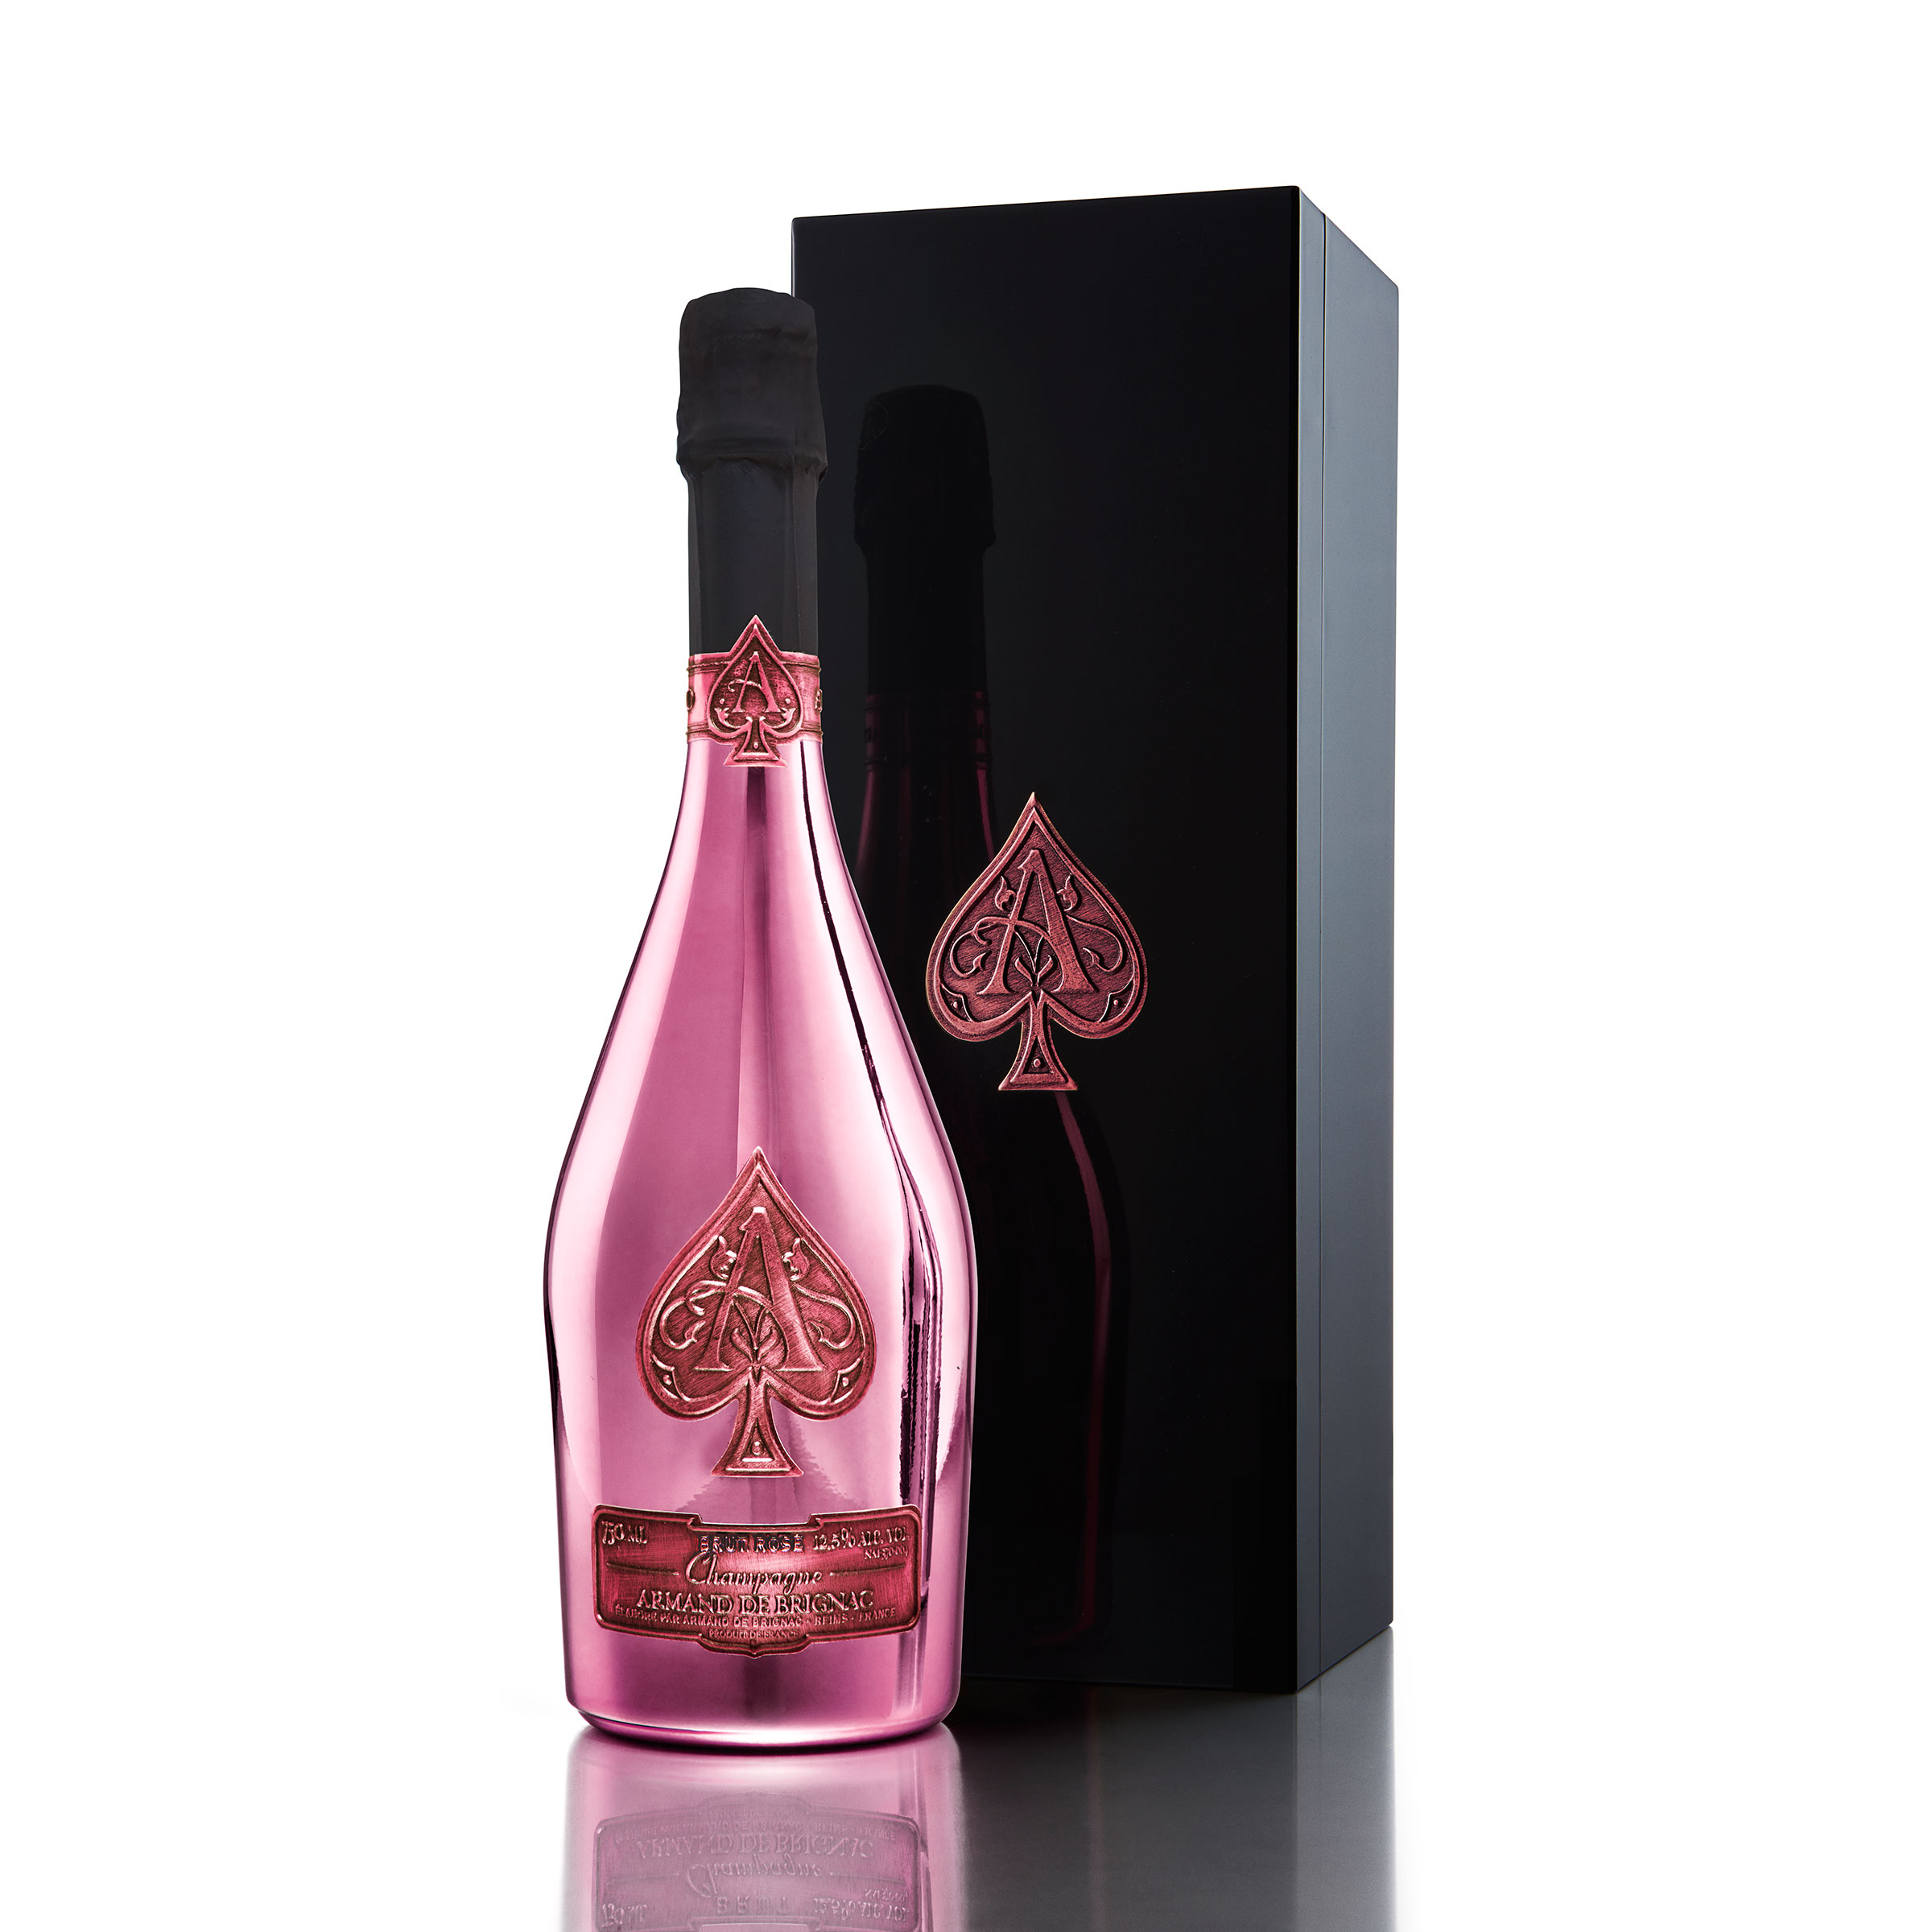 Buy And Send Armand de Brignac Brut Rose, NV Champagne 75cl in Branded Box Gift Online